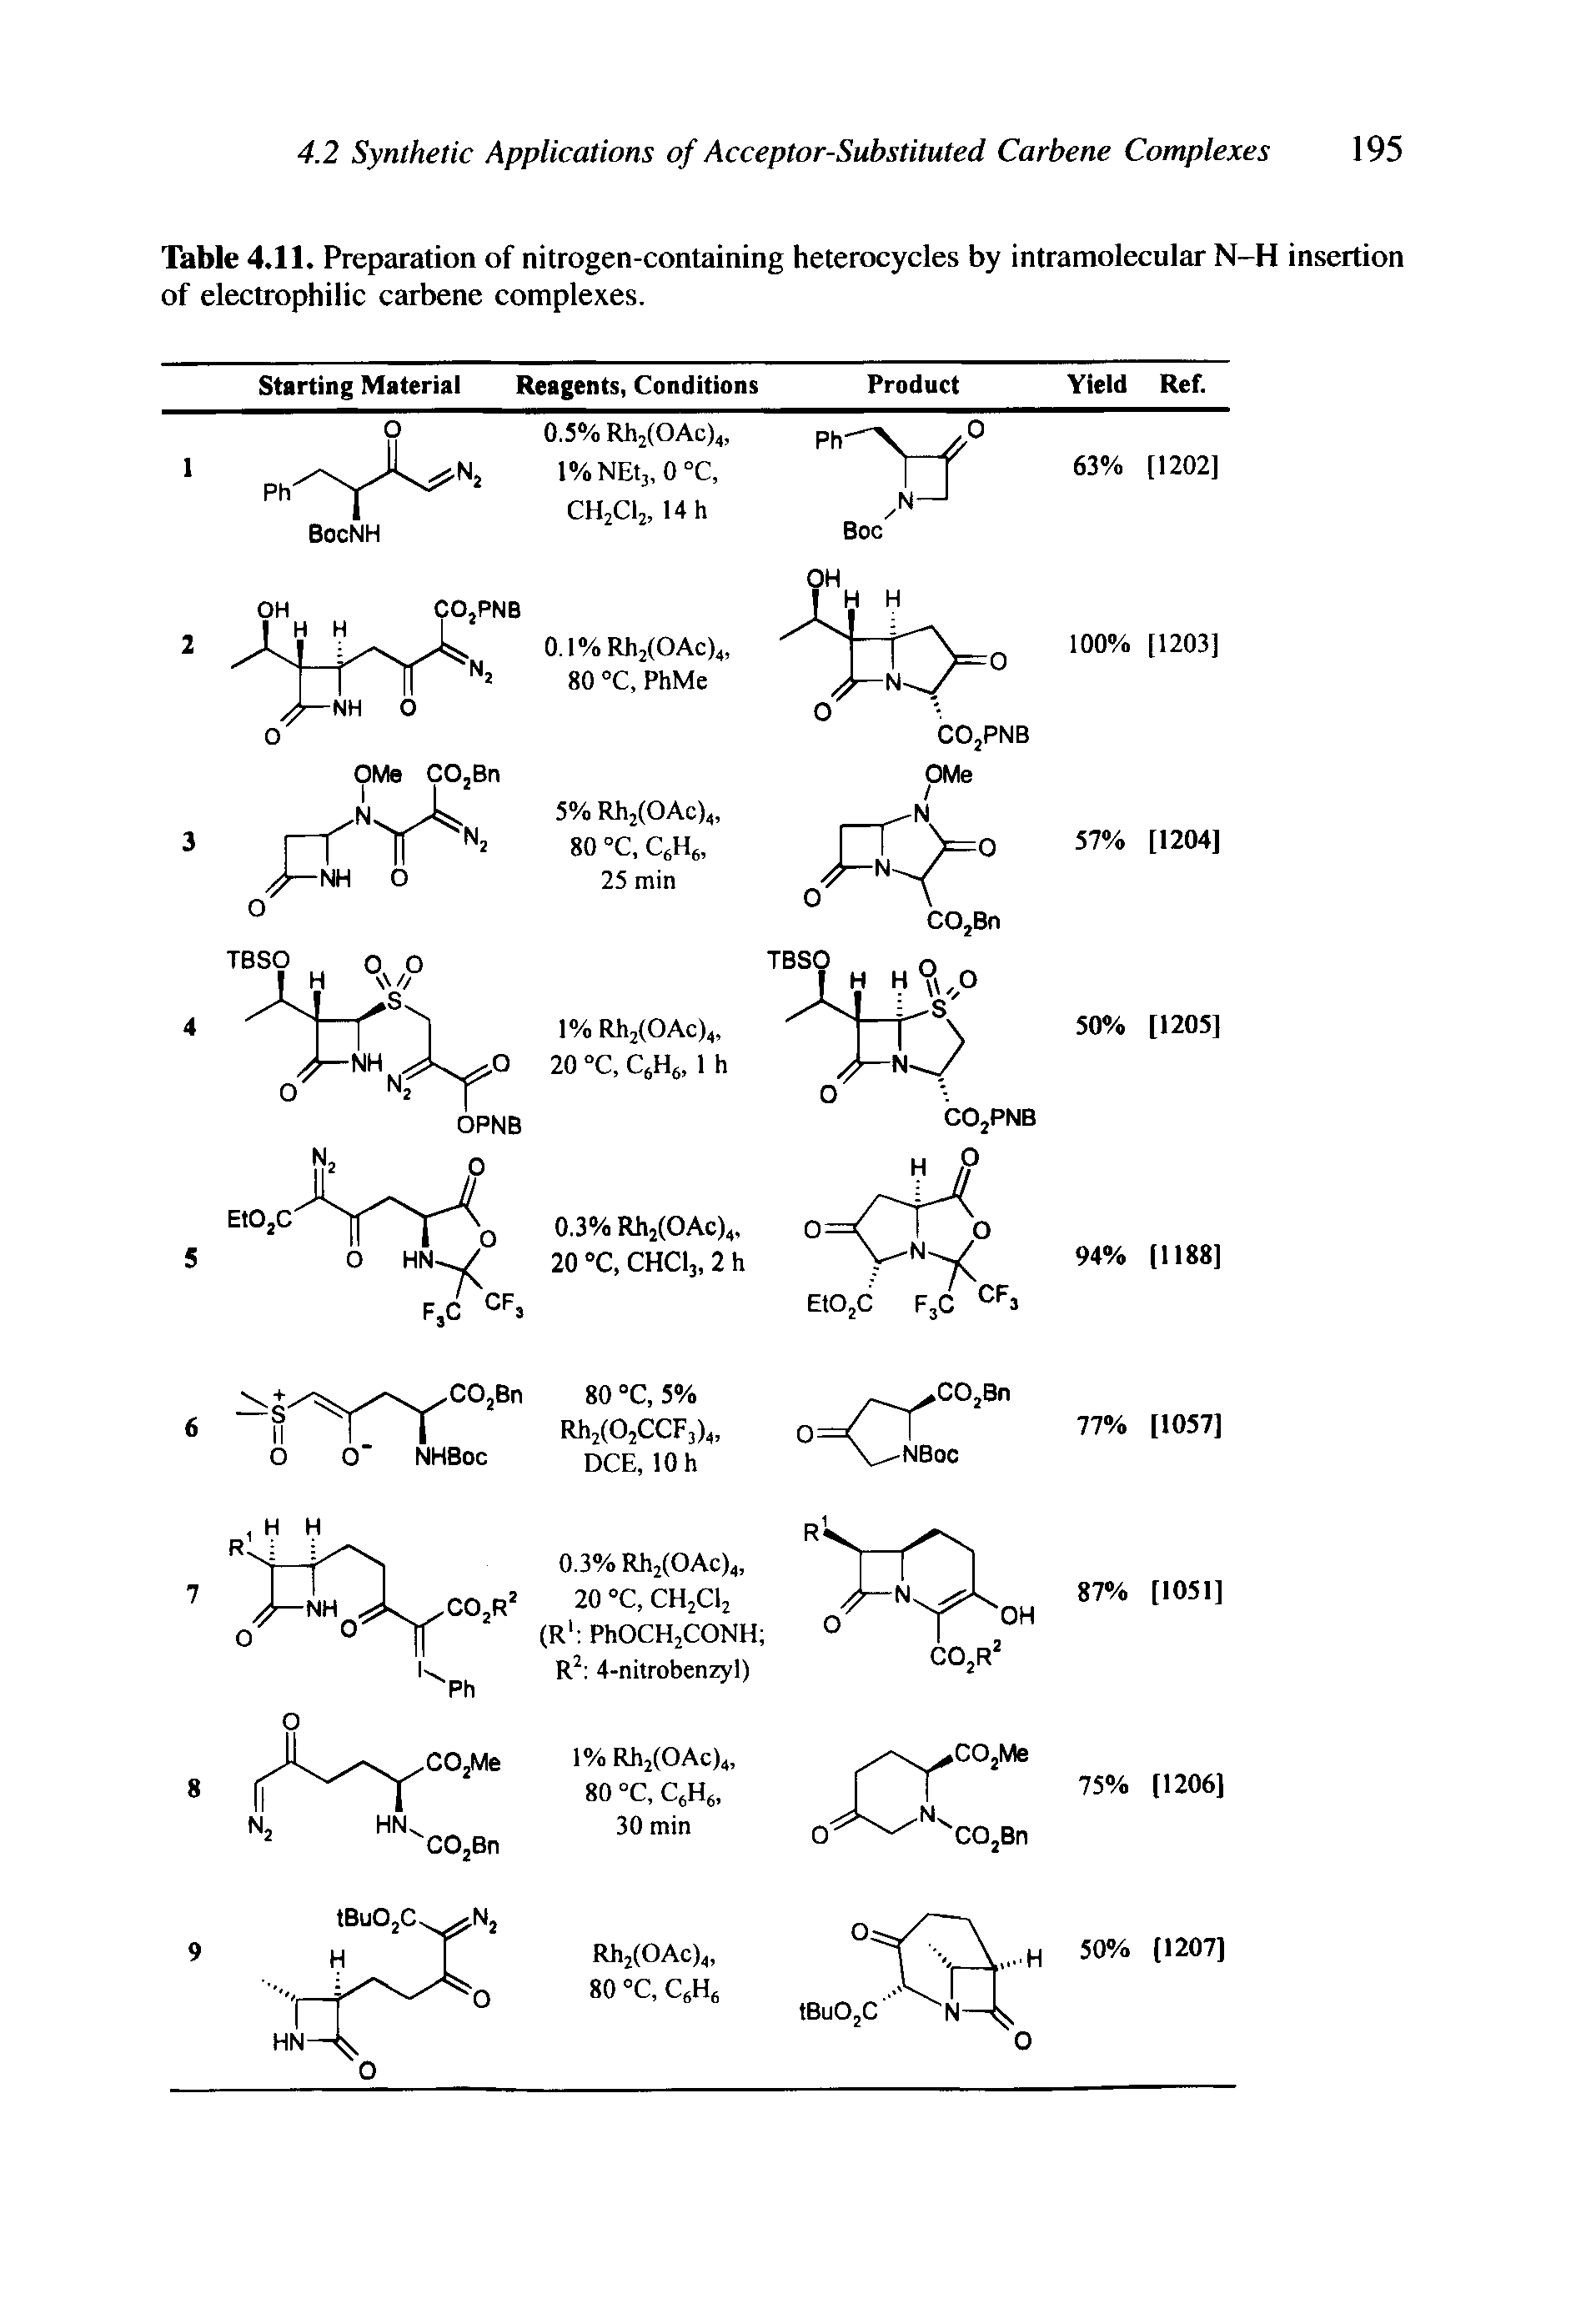 Table 4.11. Preparation of nitrogen-containing heterocycles by intramolecular N-H insertion of electrophilic carbene complexes.